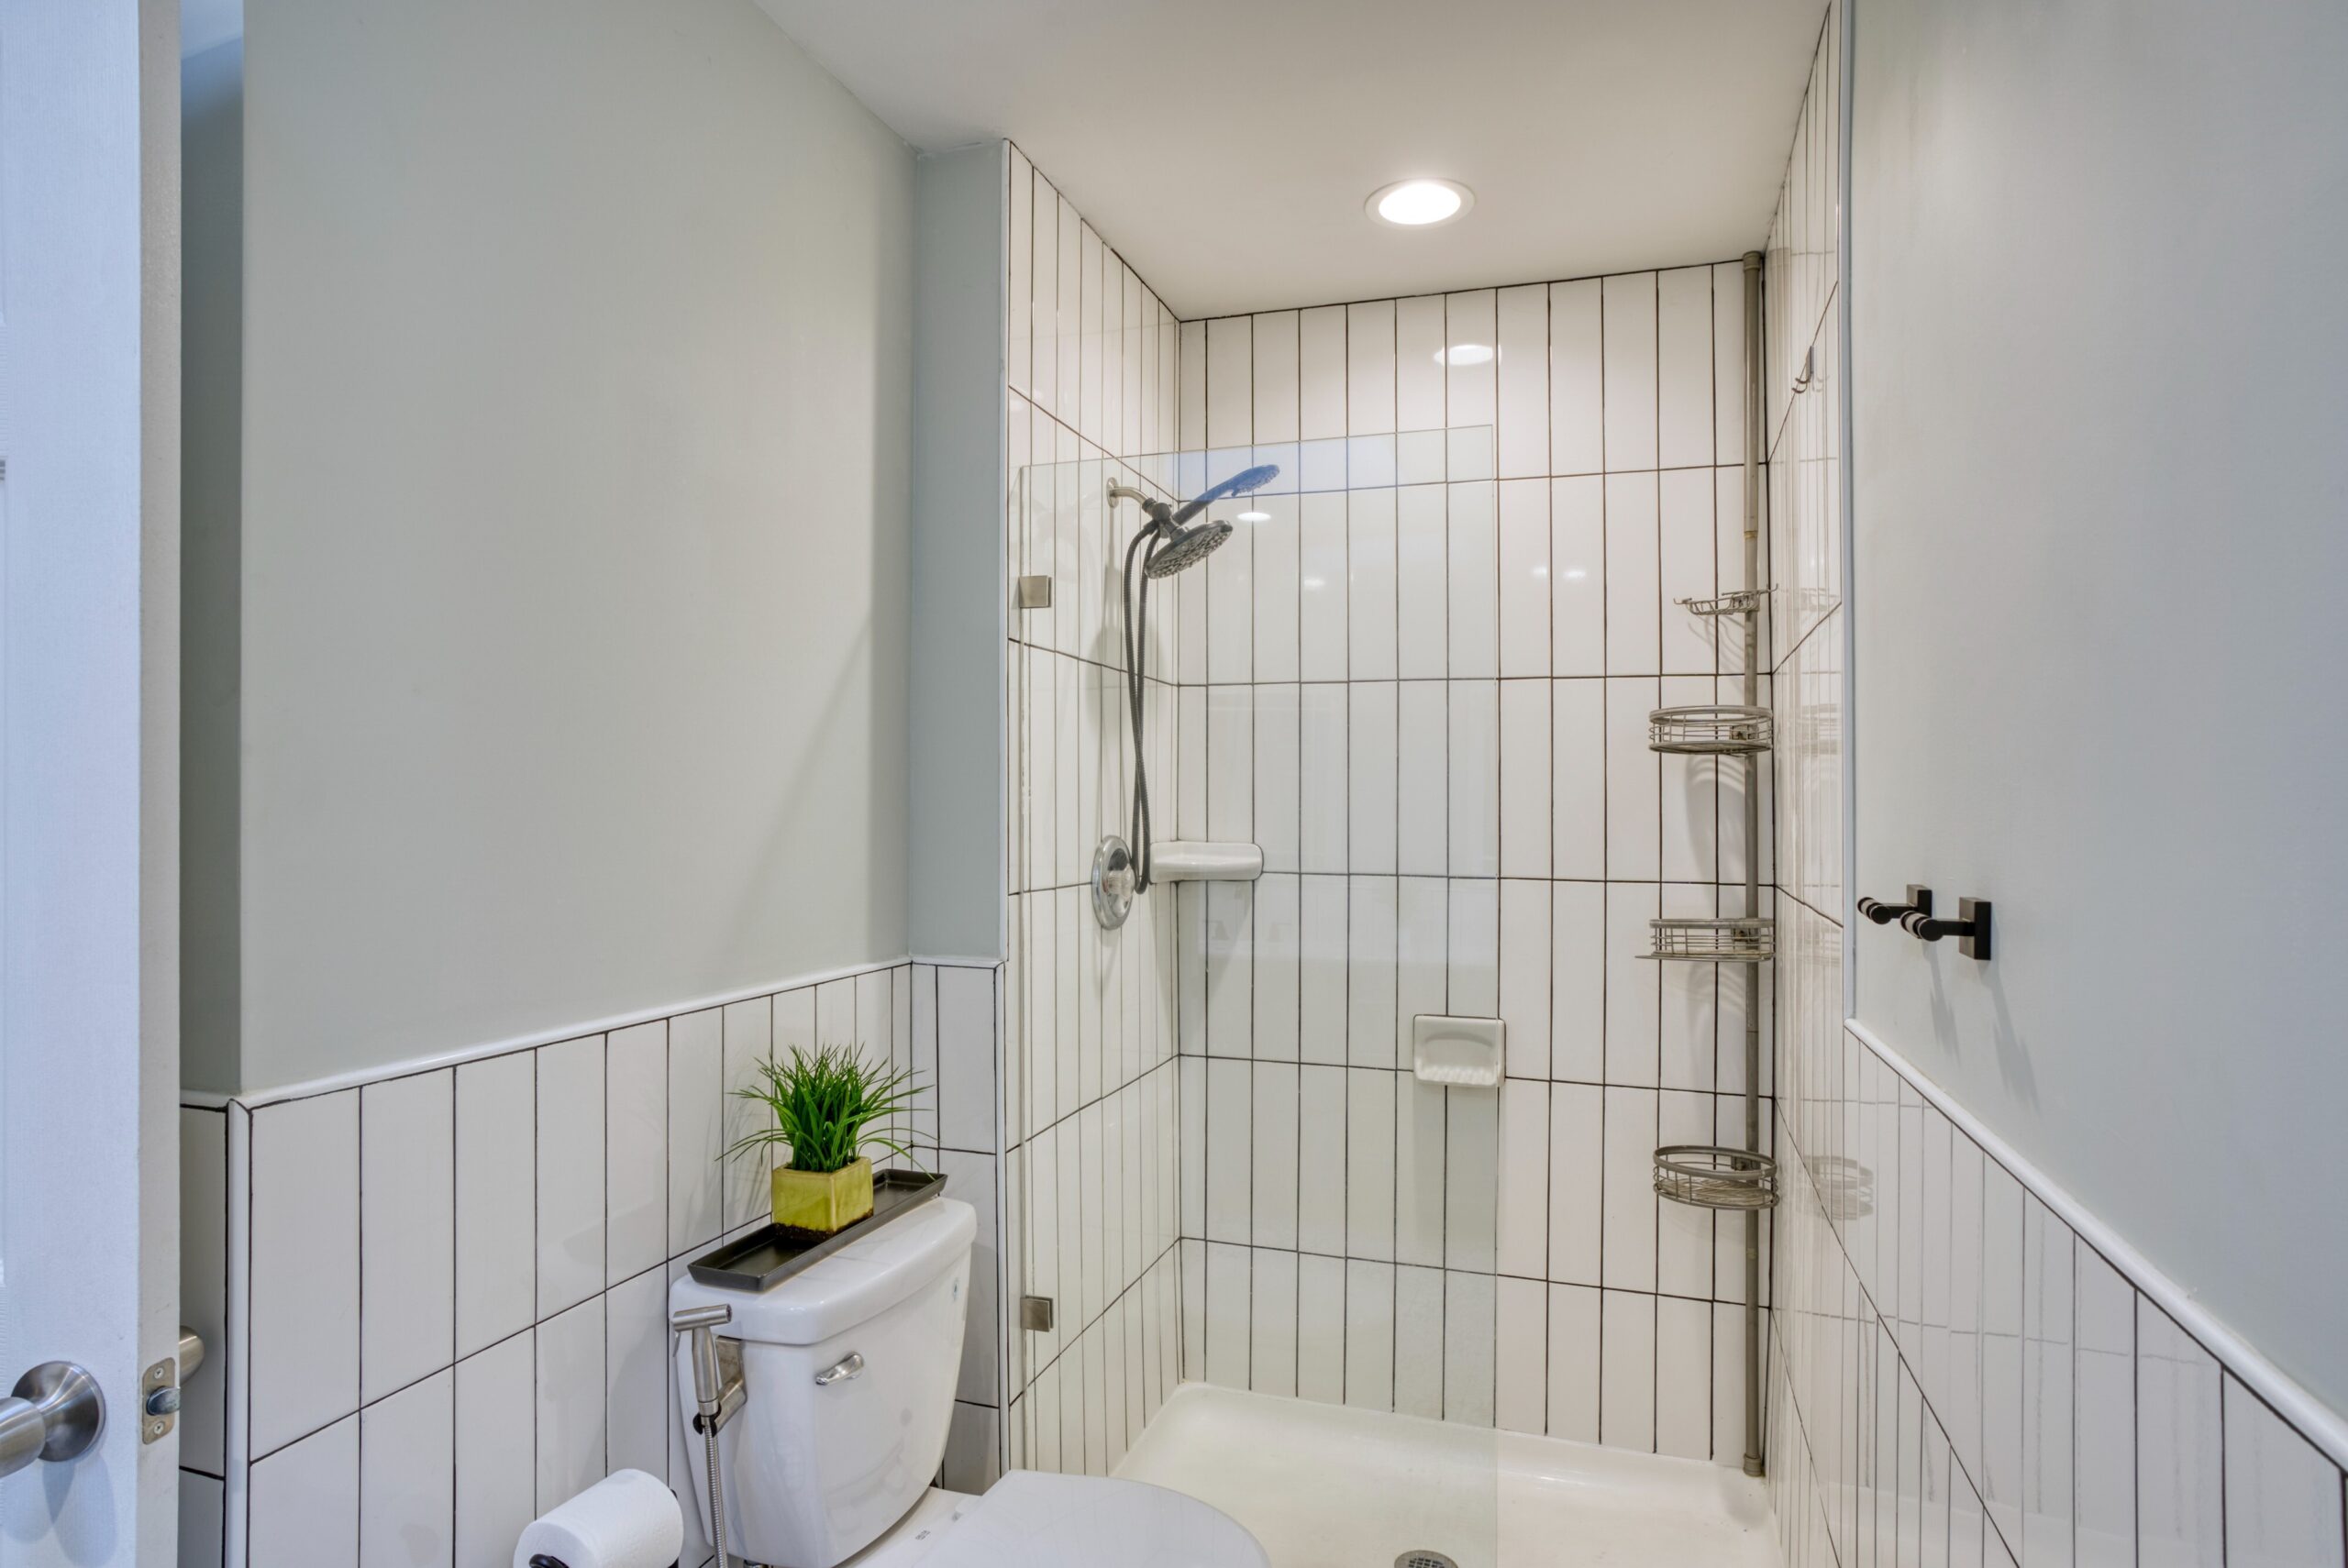 Interior professional photo of 9015 Longbow Rd - showing newly remodeled bathroom with vertical subway tiles in the shower and lower section of bathroom walls.